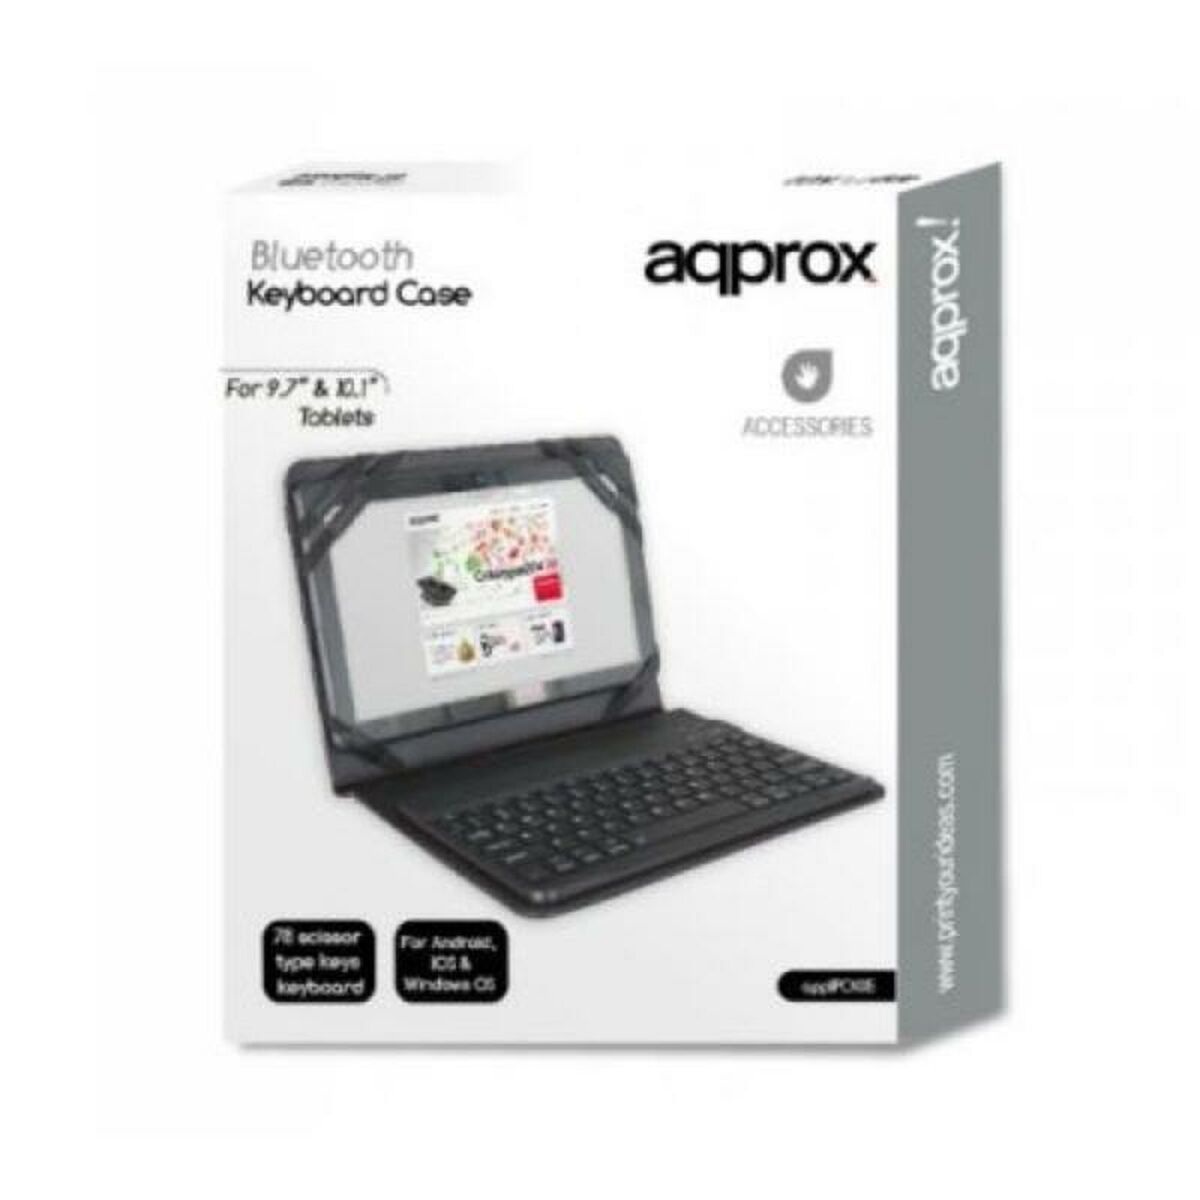 Tablet and Keyboard Case Bluetooth approx! APPIPCK06 9.7"-10.1"